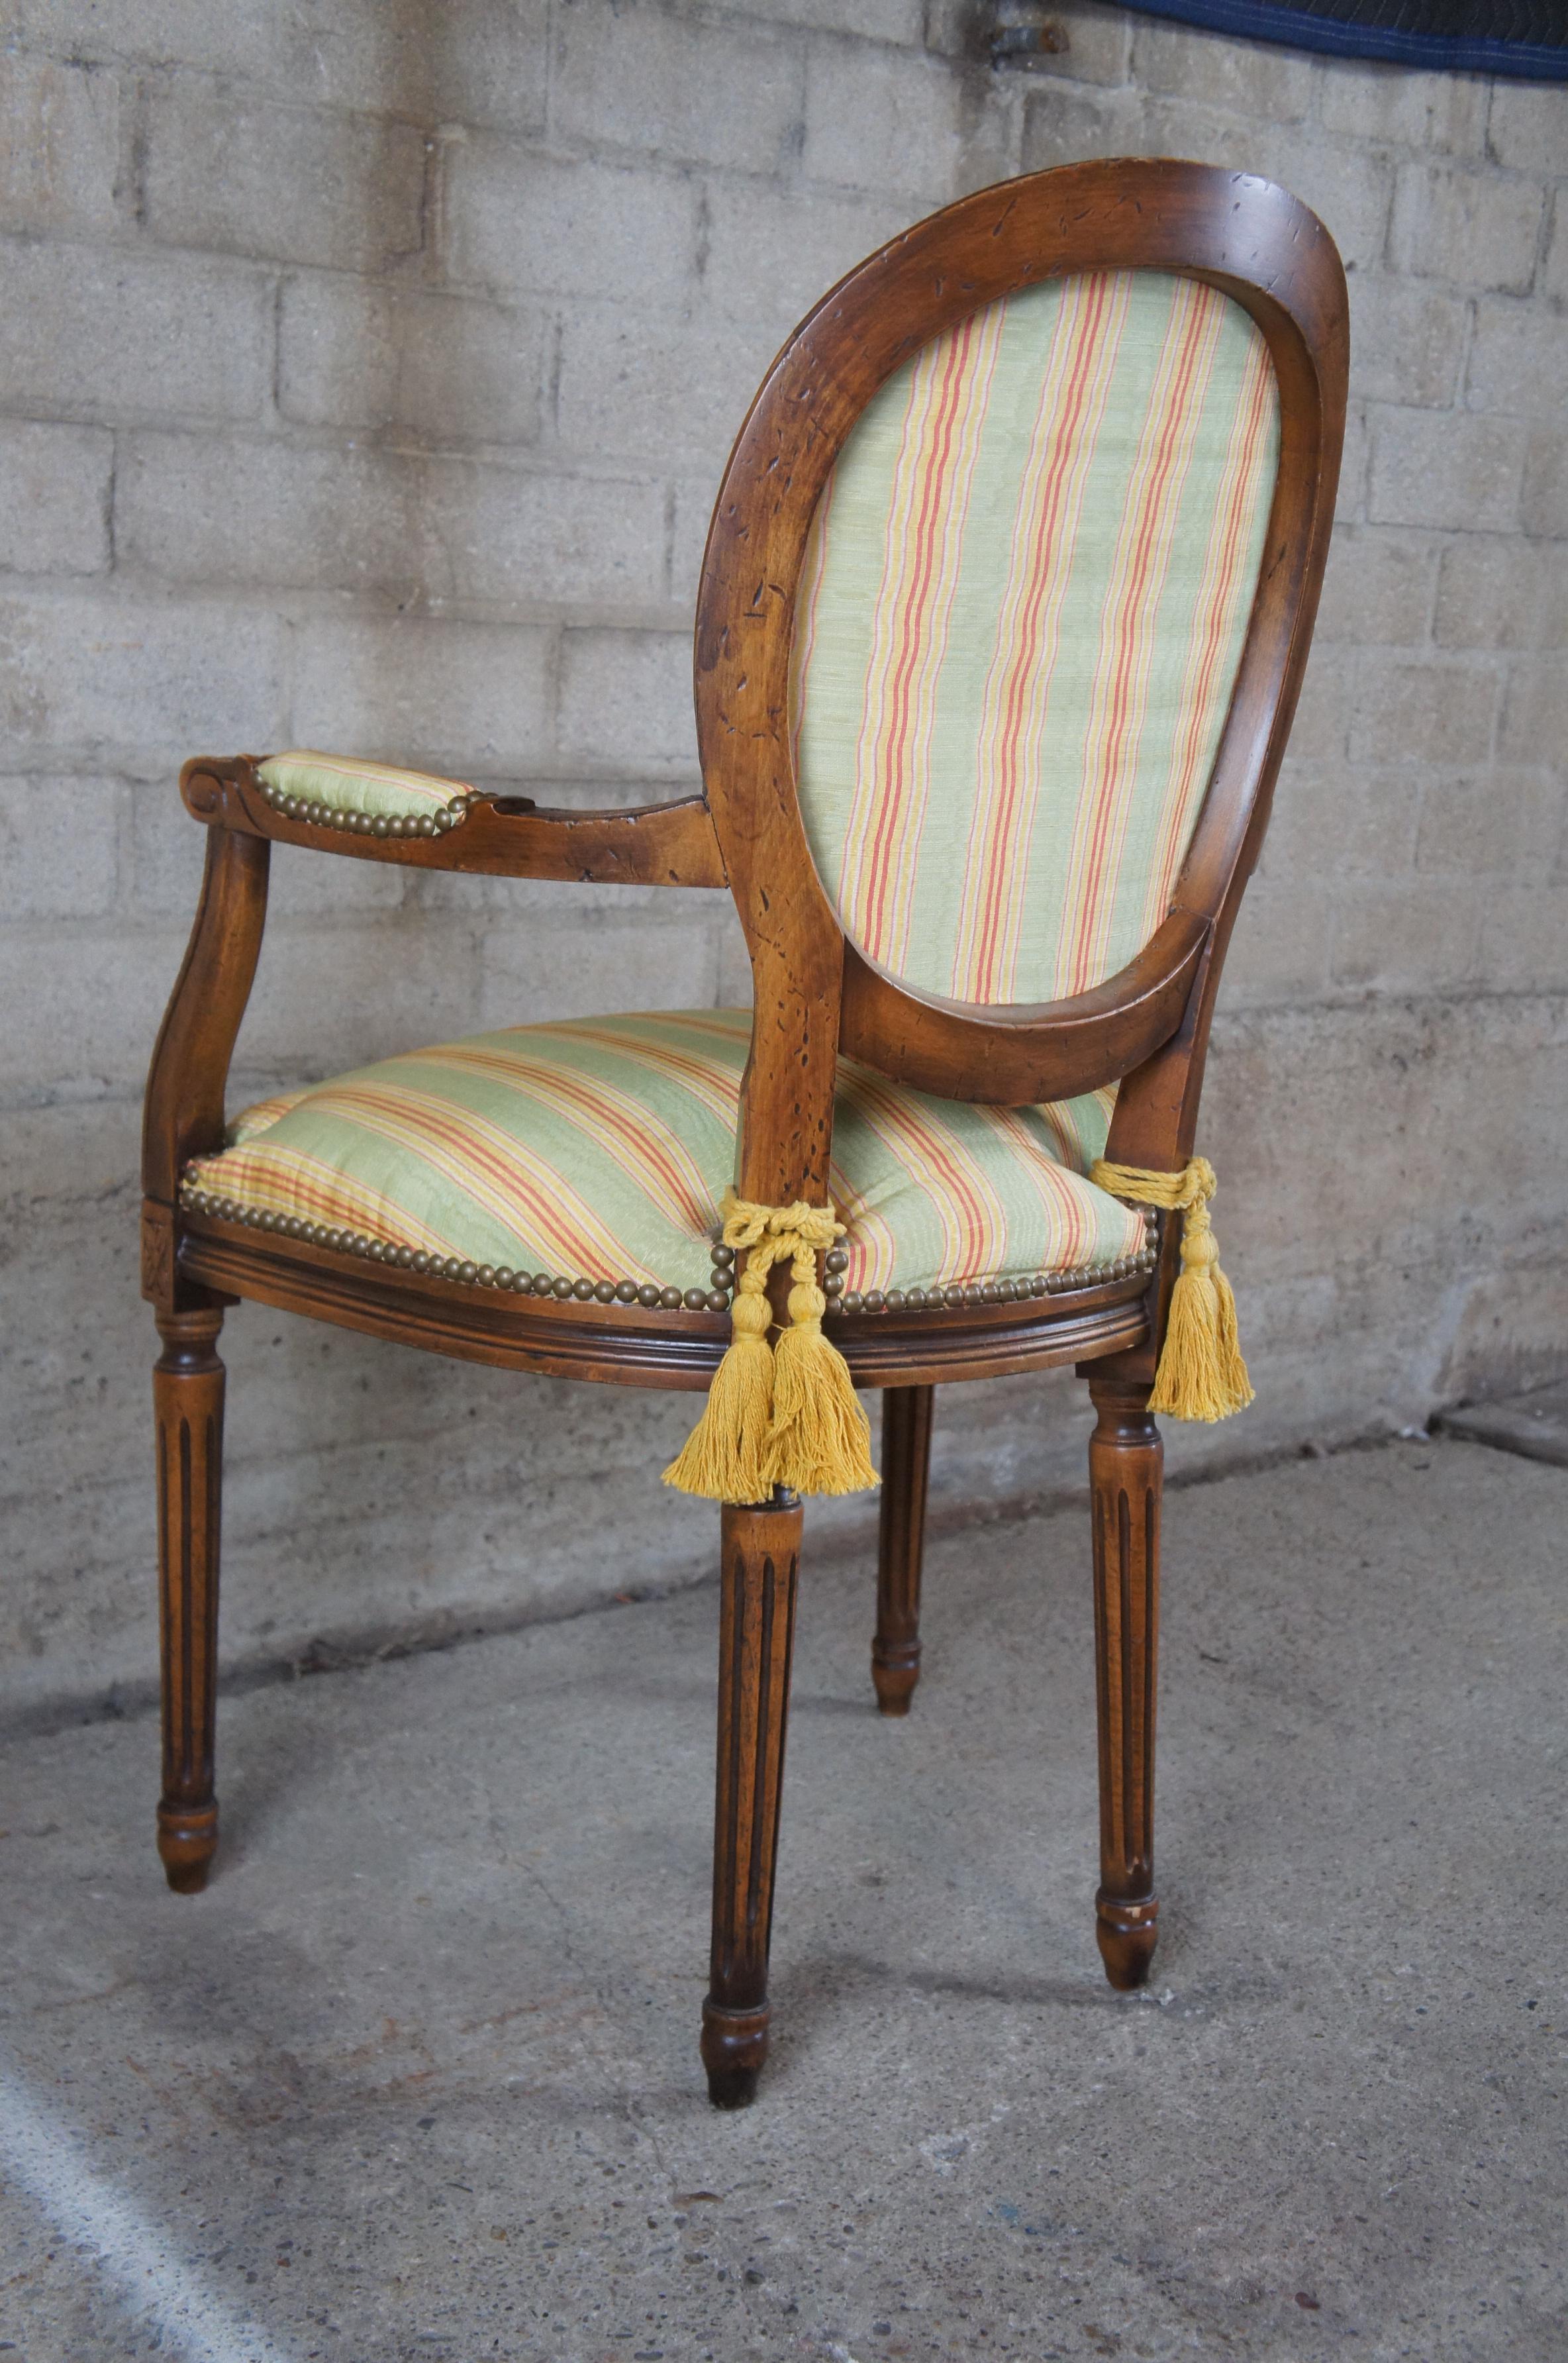 Upholstery Chateau D'AX French Louis XVI Upholstered Nailhead Fauteuil Arm Chair, Italian